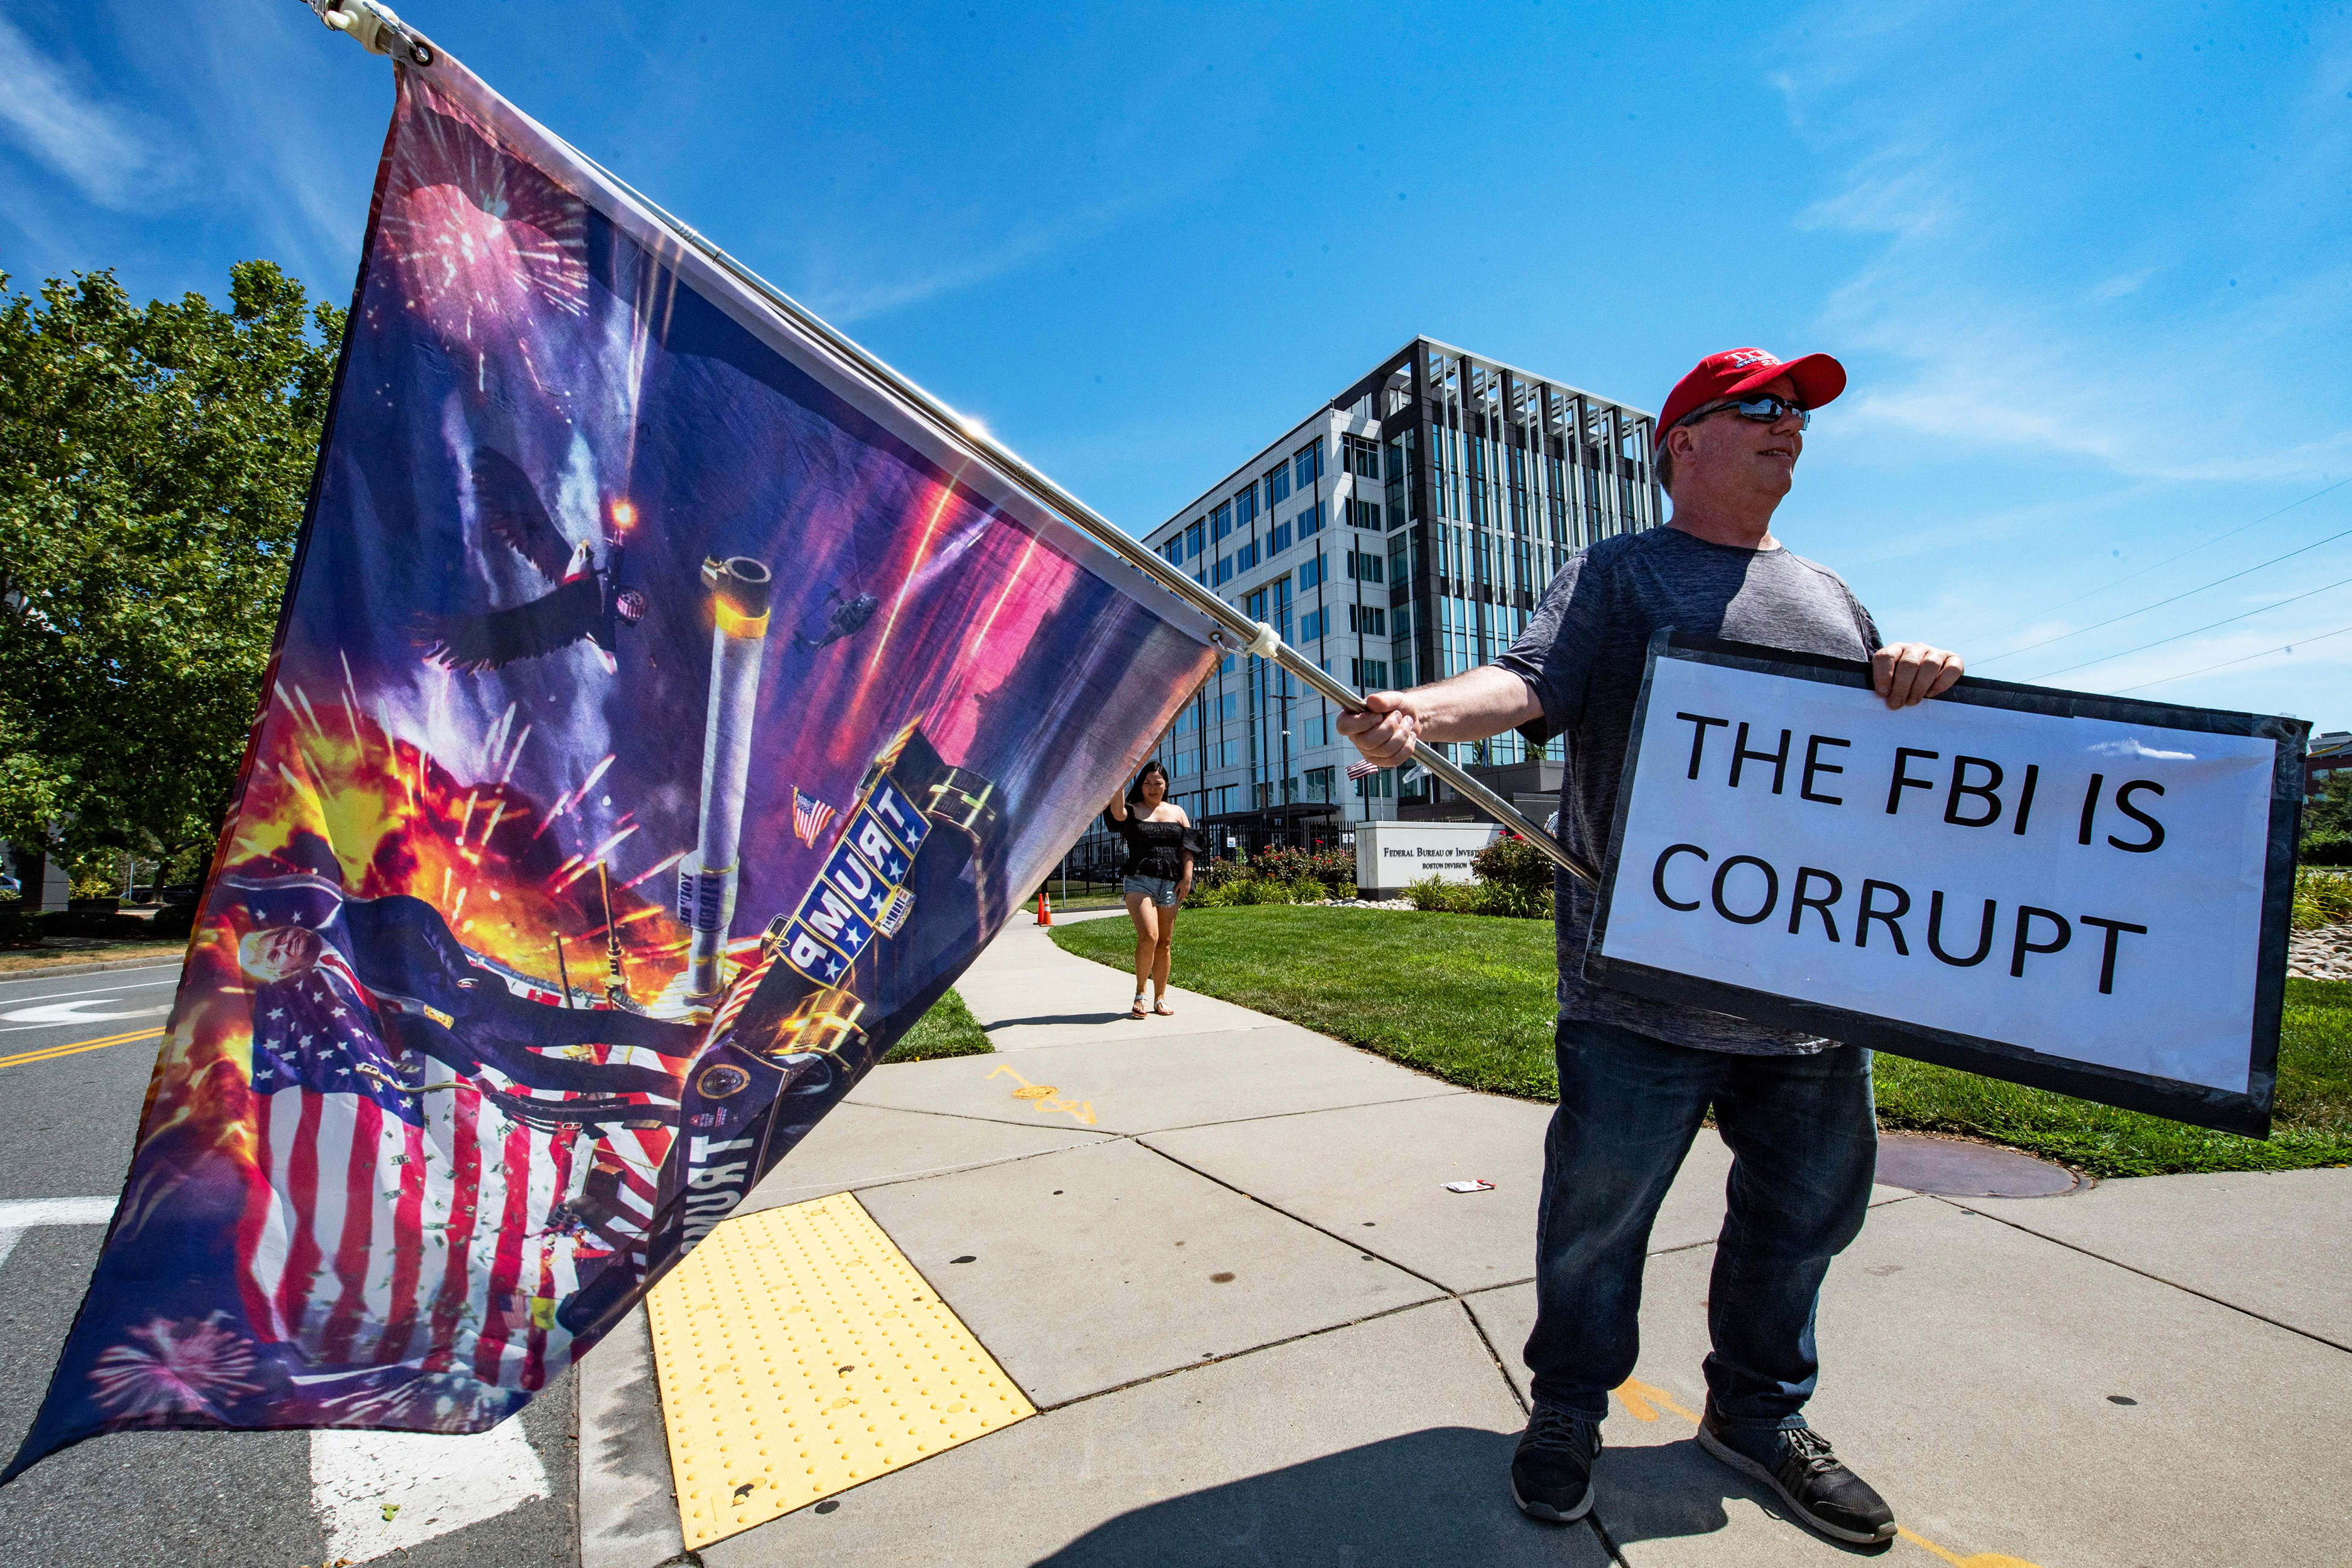 A demonstrator holding a flag and a sign that reads “The FBI is corrupt.”